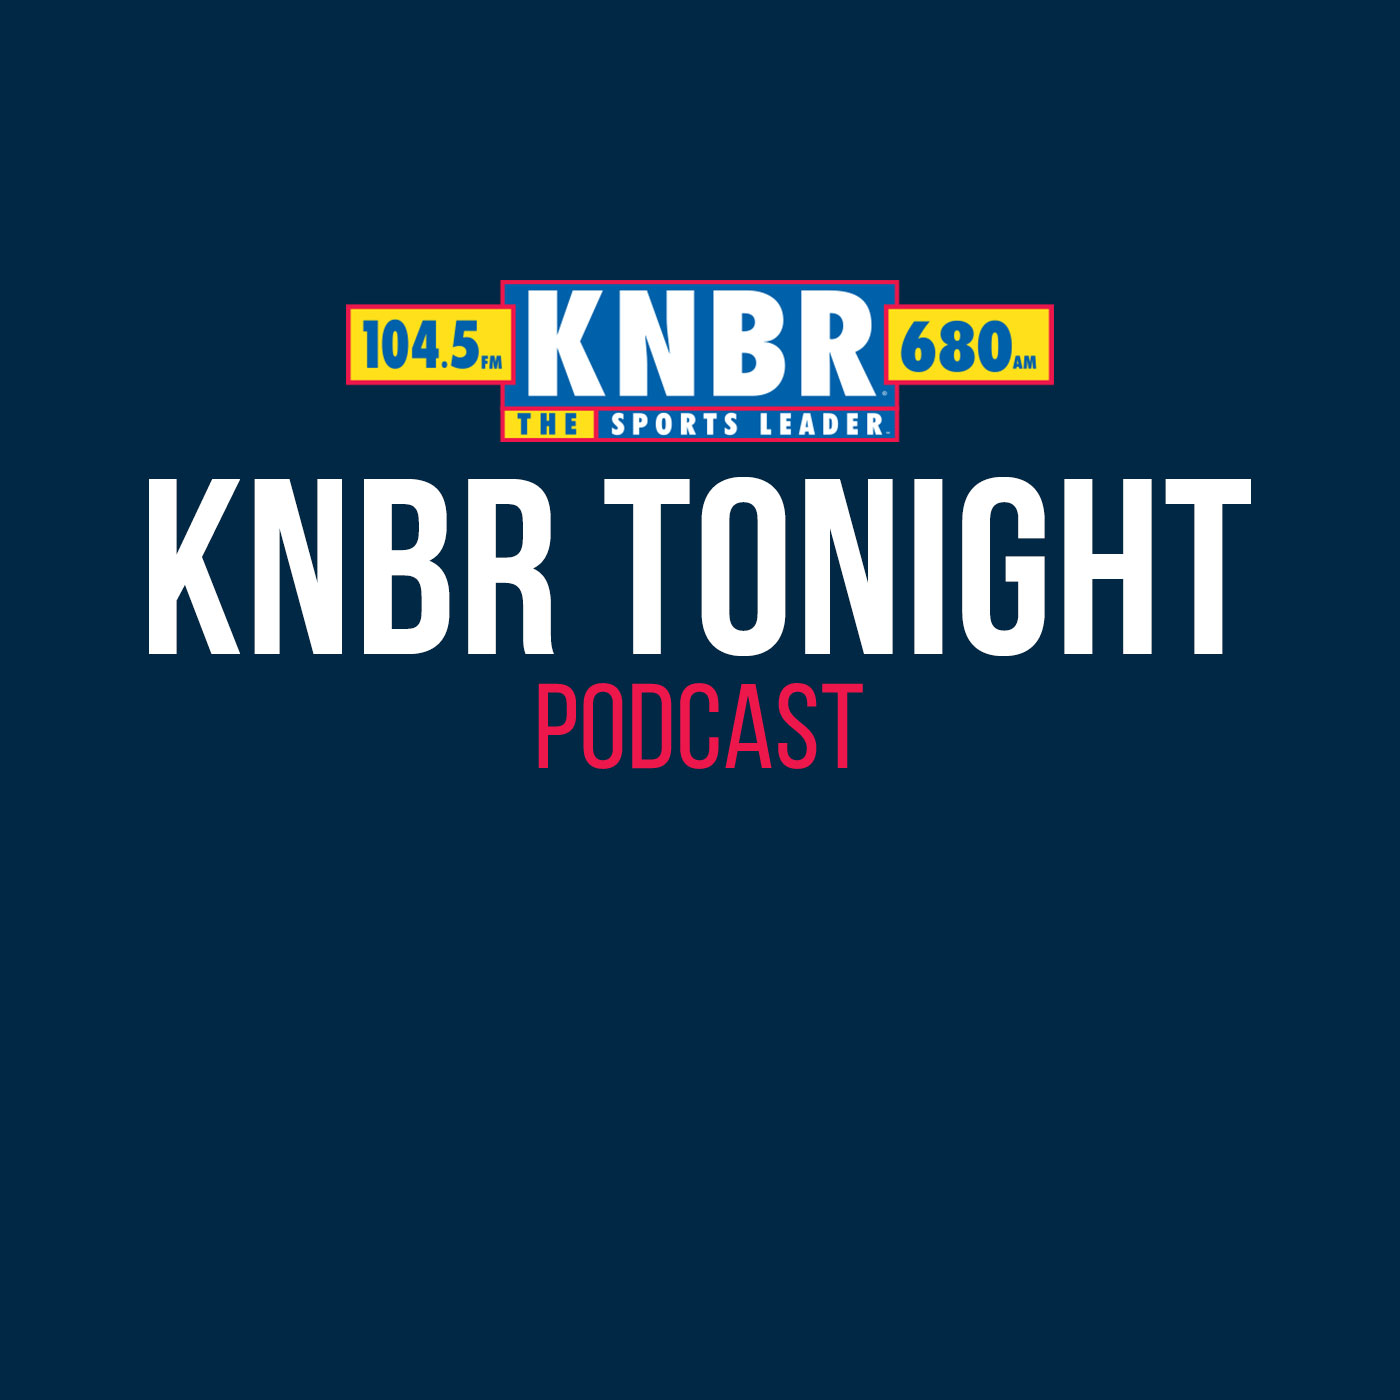 11-21 Mike Yam from NFL Network joins F.P. Santangelo on KNBR Tonight